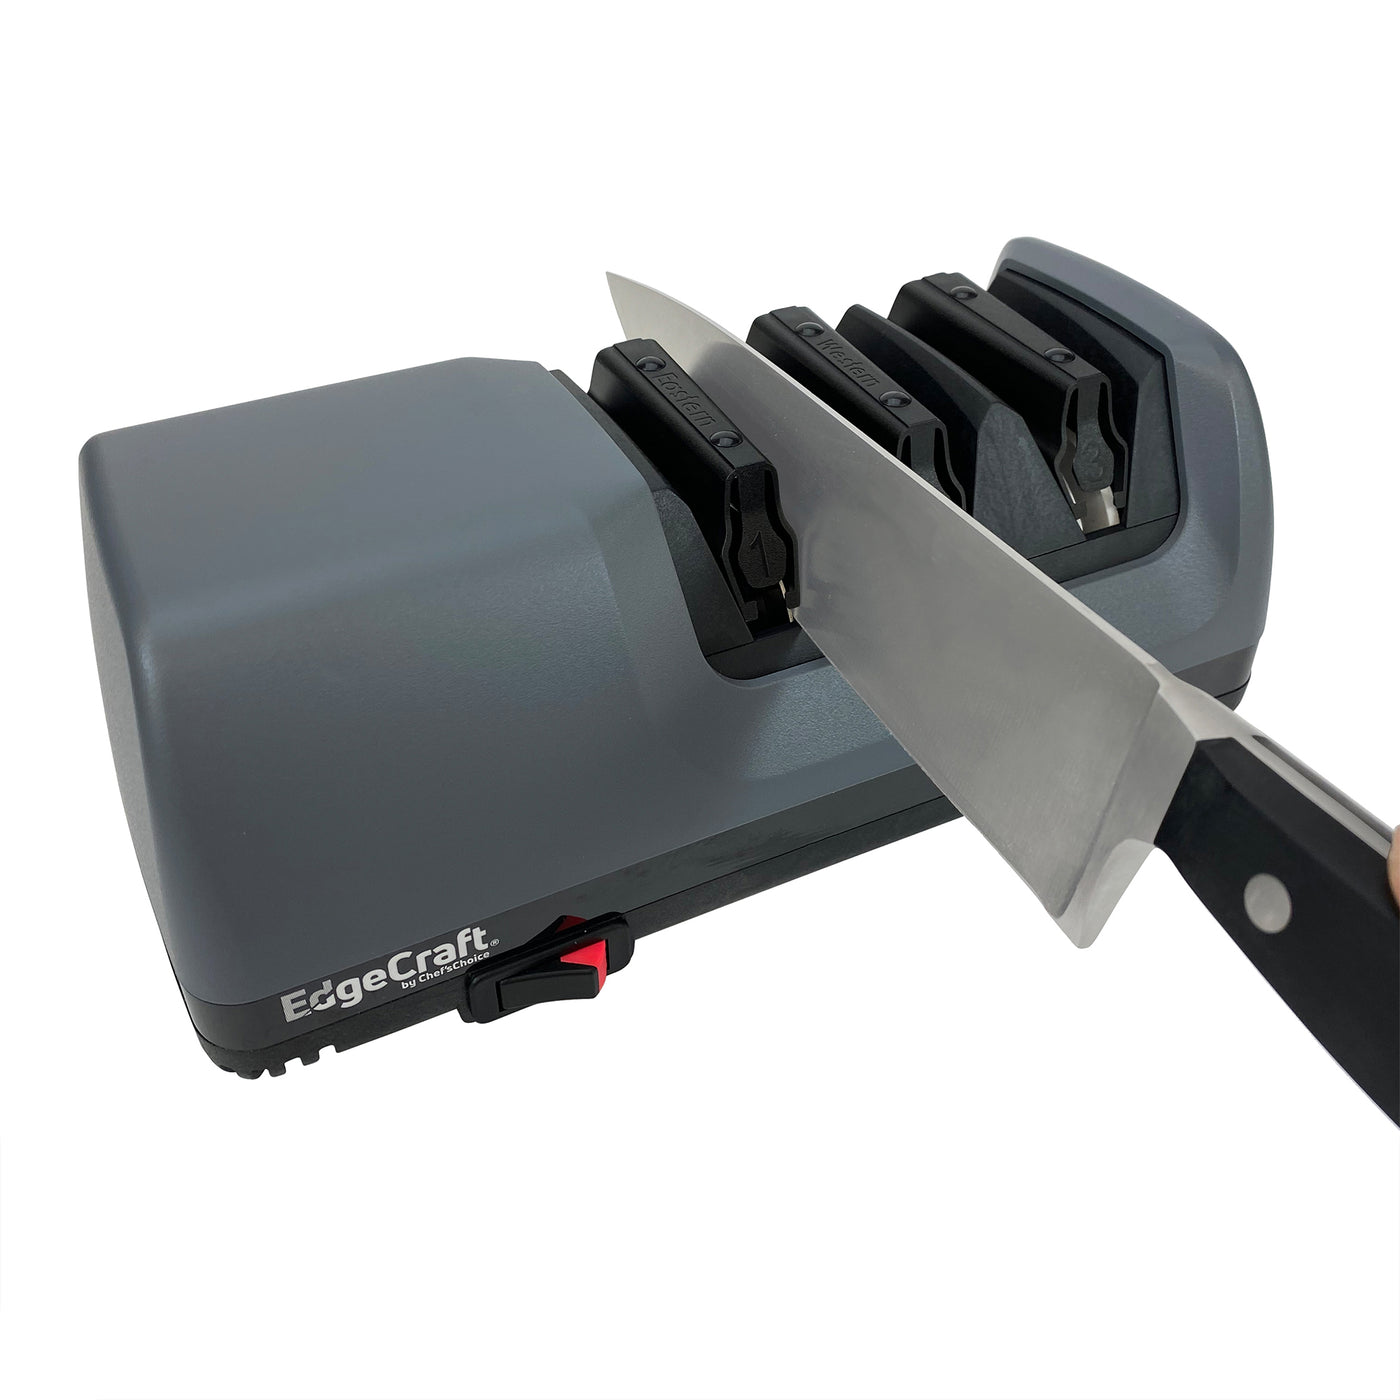 Our AngleSelect professional electric knife sharpener is the